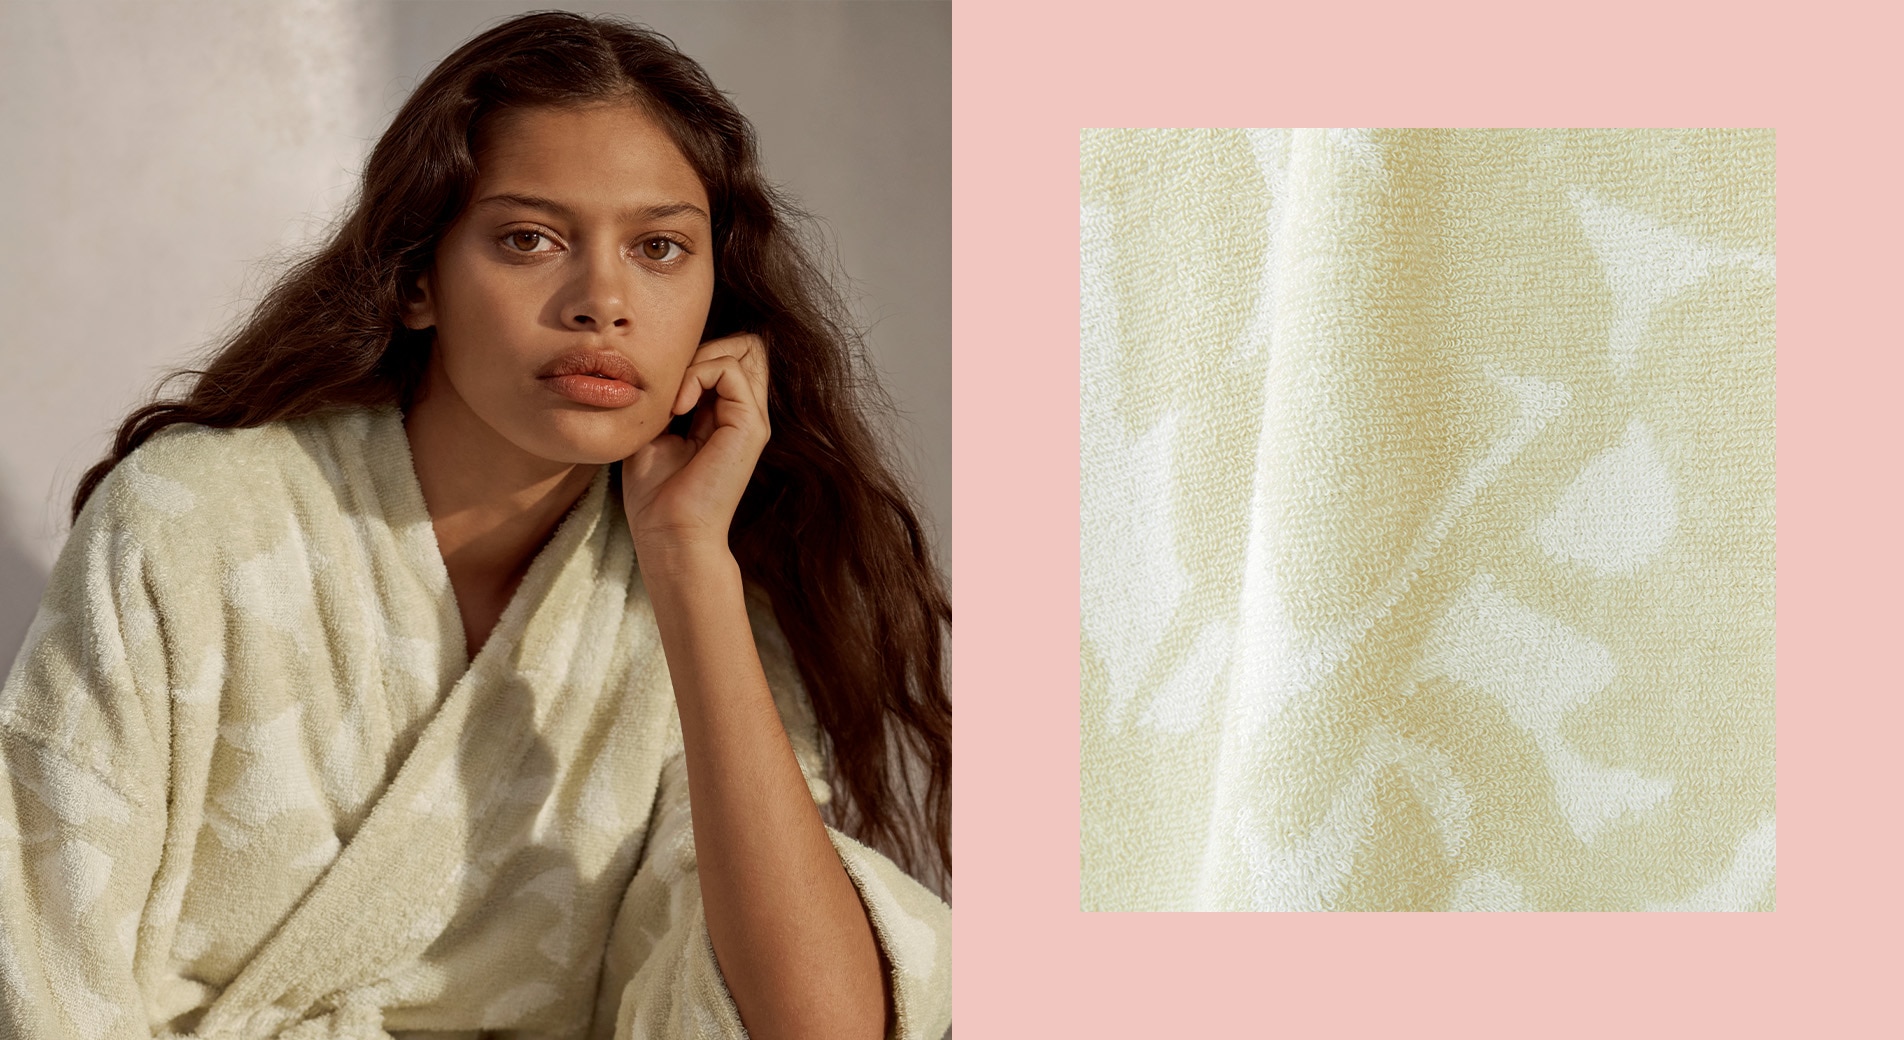 split image. left side: brown woman with brown hair, eyes and pouty lips stares at camera. her hand rests on her cheek. she wears a light lime green and white robe. right side: light lime green and white robe close up, abstract pattern. pink border.